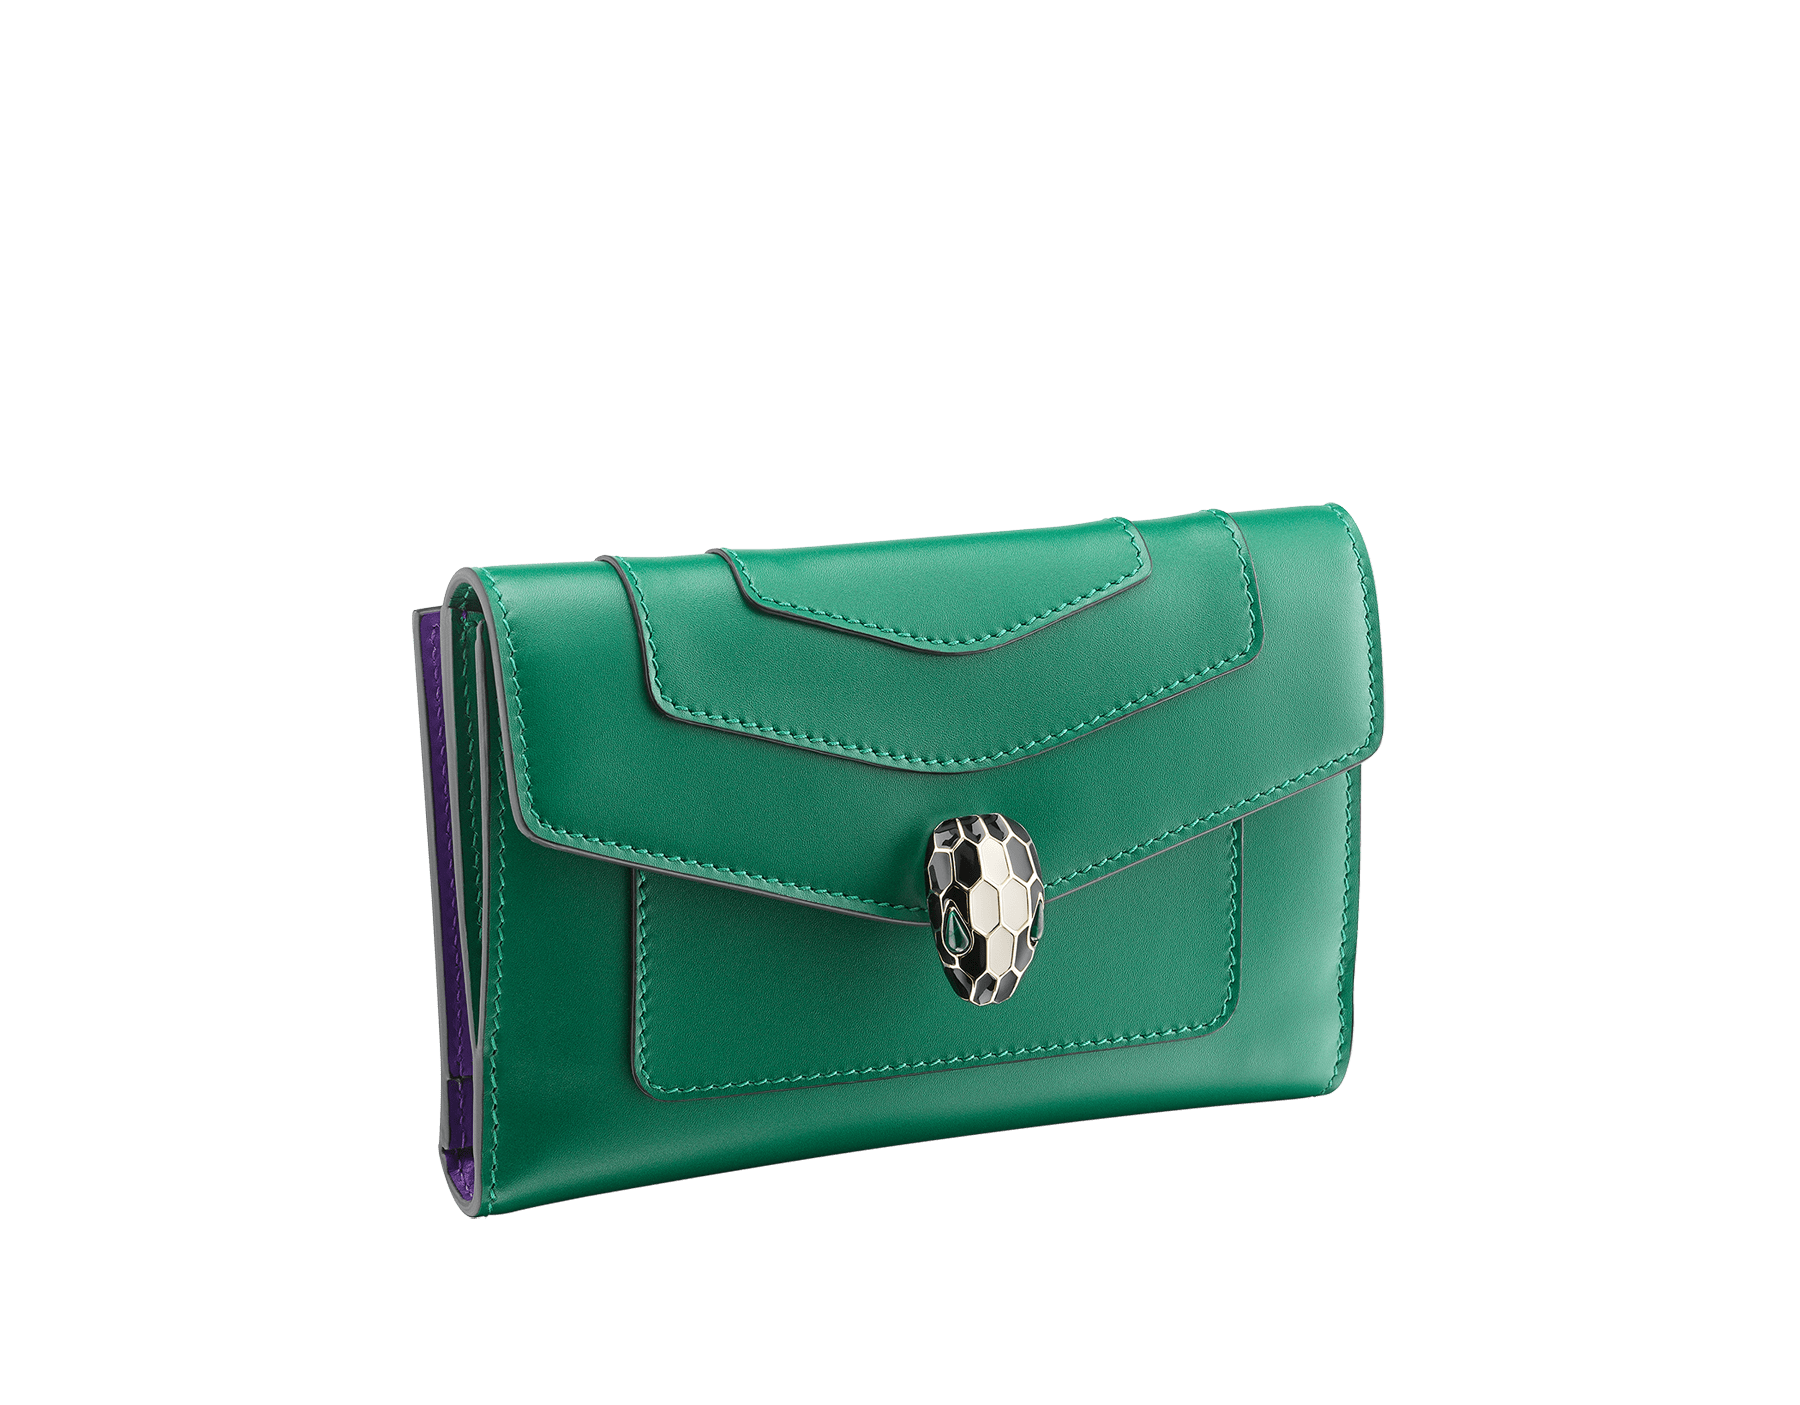 Serpenti Forever large wallet in emerald green calf leather with violet amethyst nappa leather interior. Captivating snakehead press button closure in light gold-plated brass embellished with black and white agate enamel scales and green malachite eyes. 291854 image 1